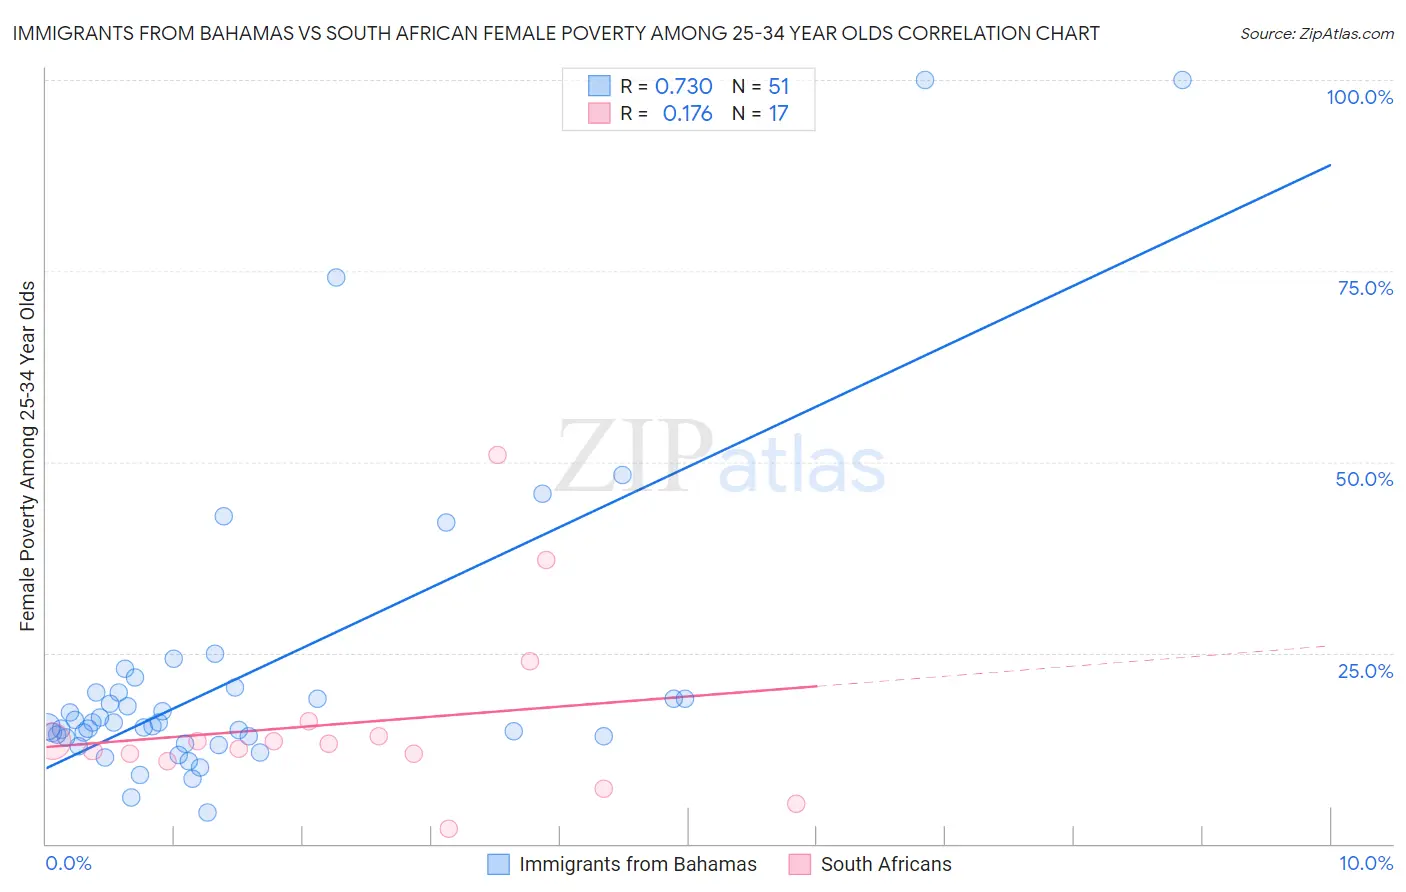 Immigrants from Bahamas vs South African Female Poverty Among 25-34 Year Olds